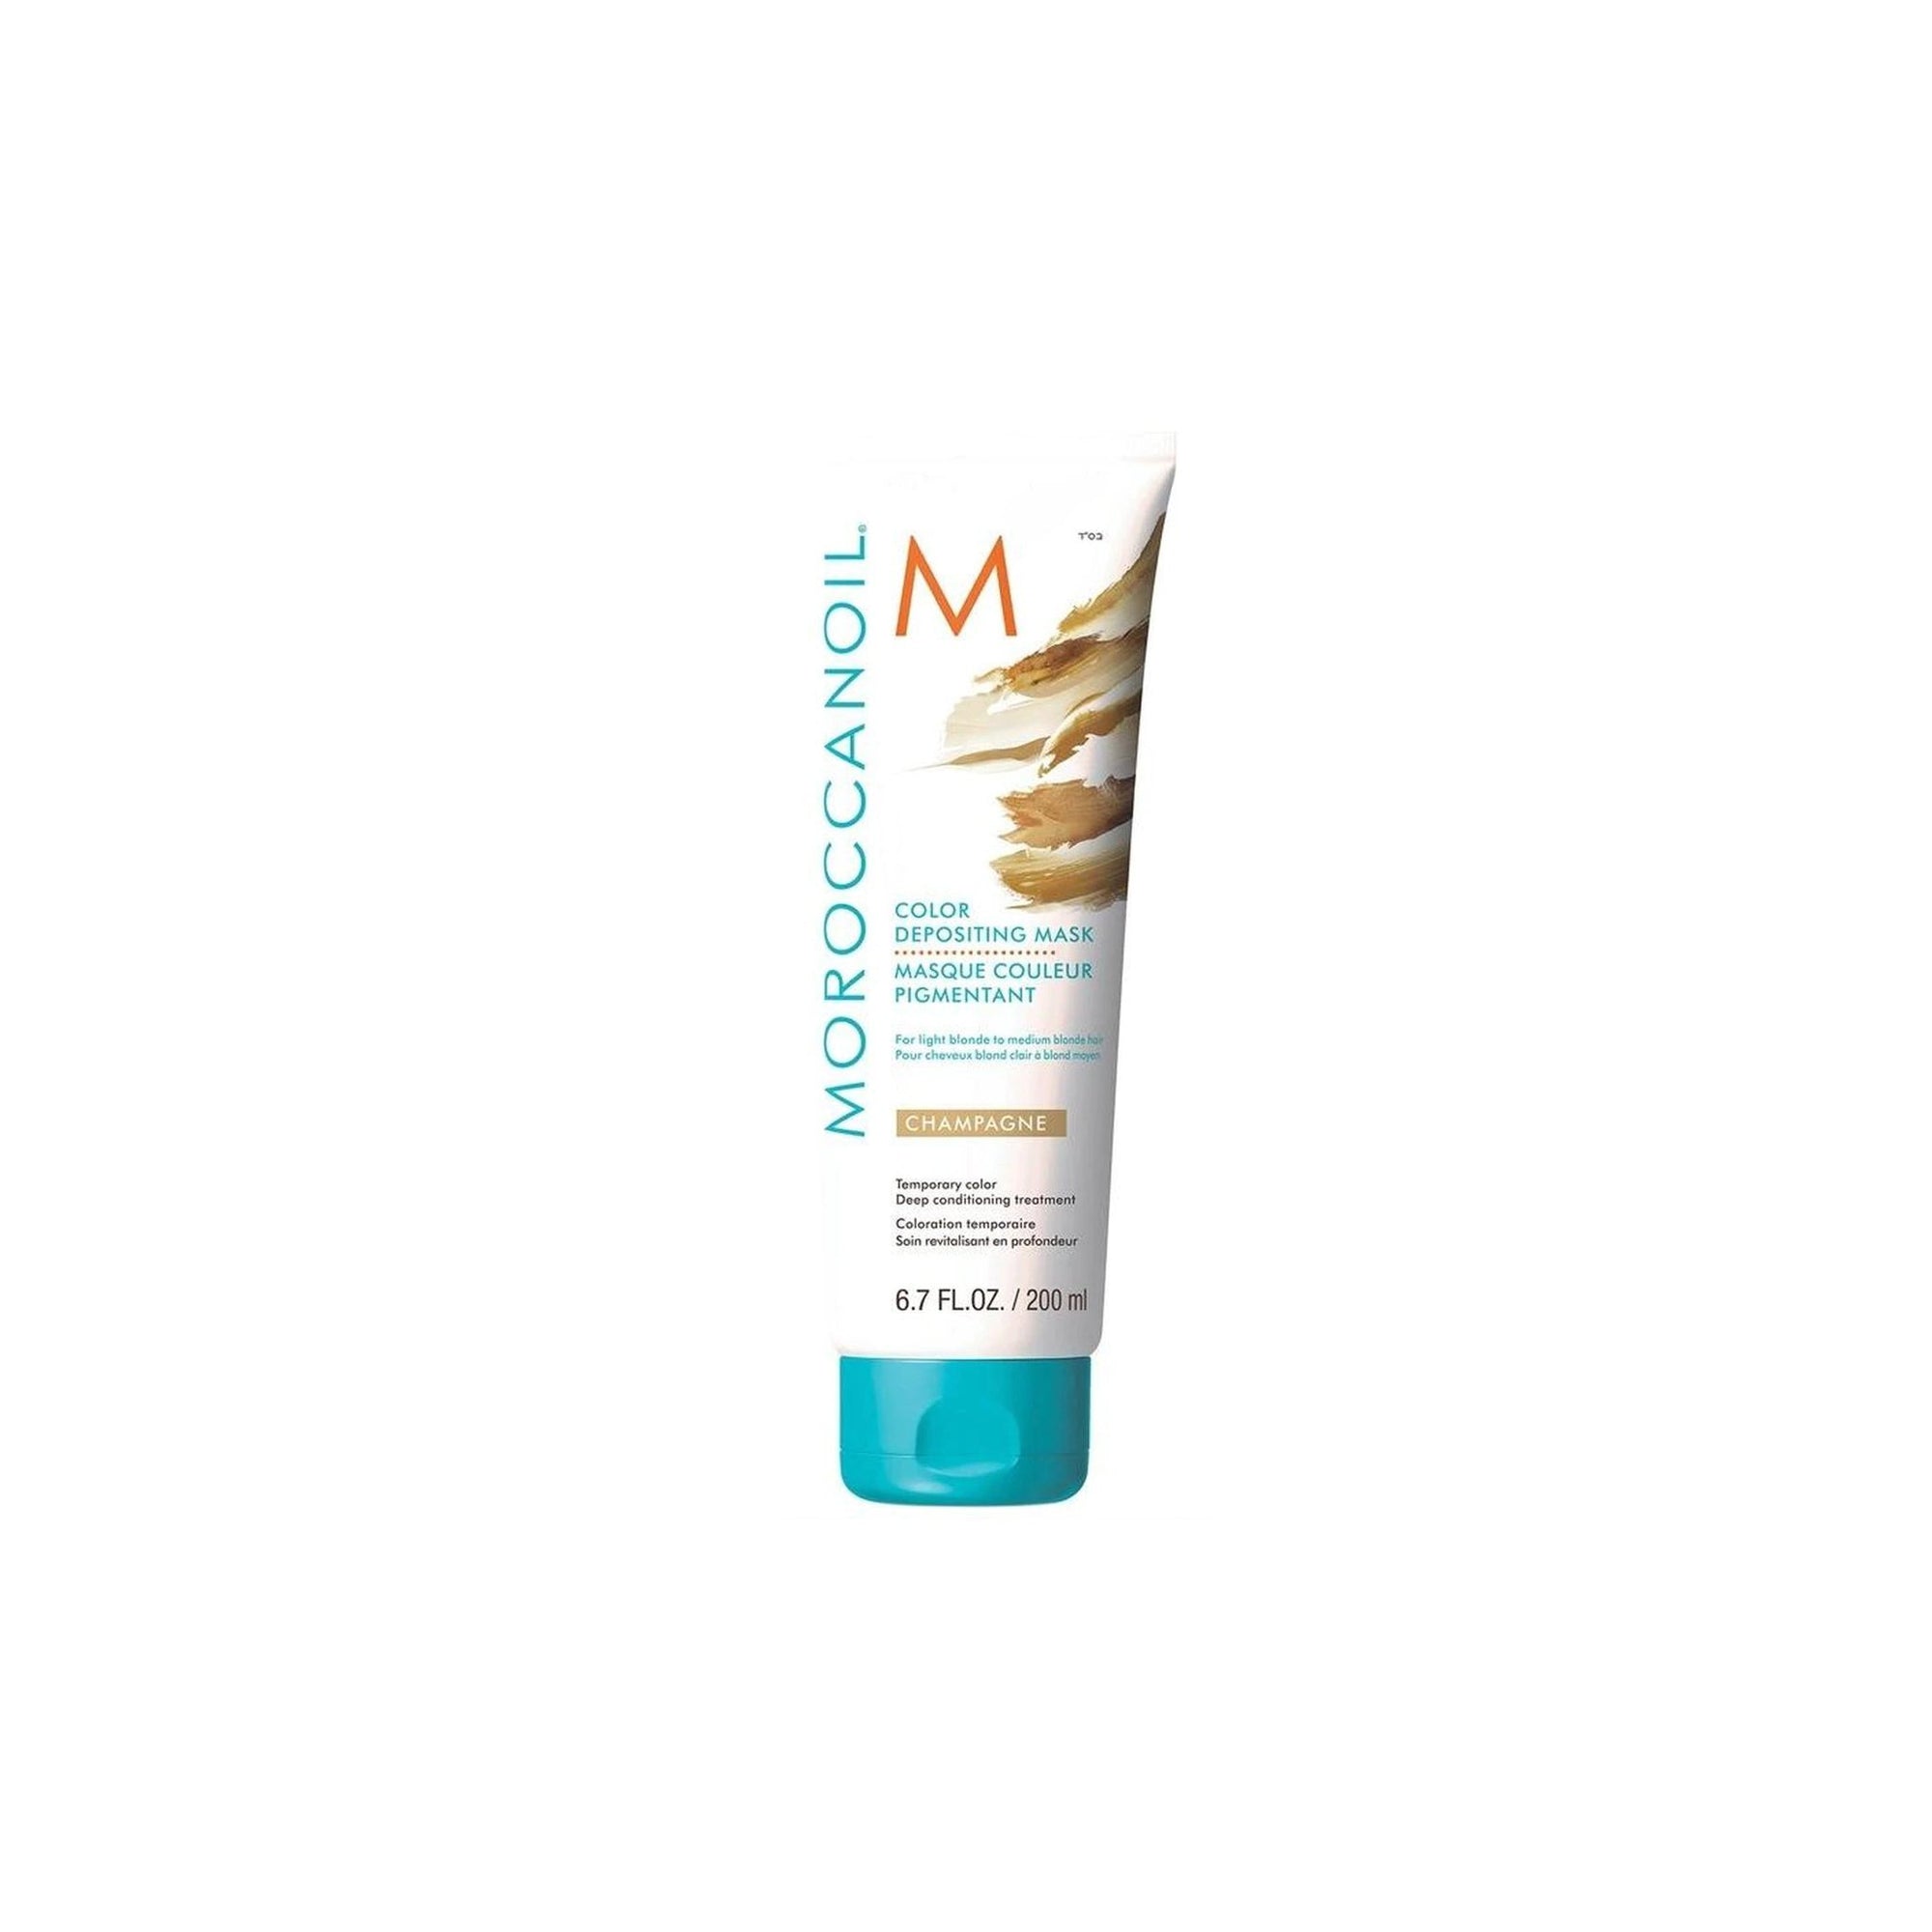 Moroccanoil Color Depositing Mask 200ml - Champagne